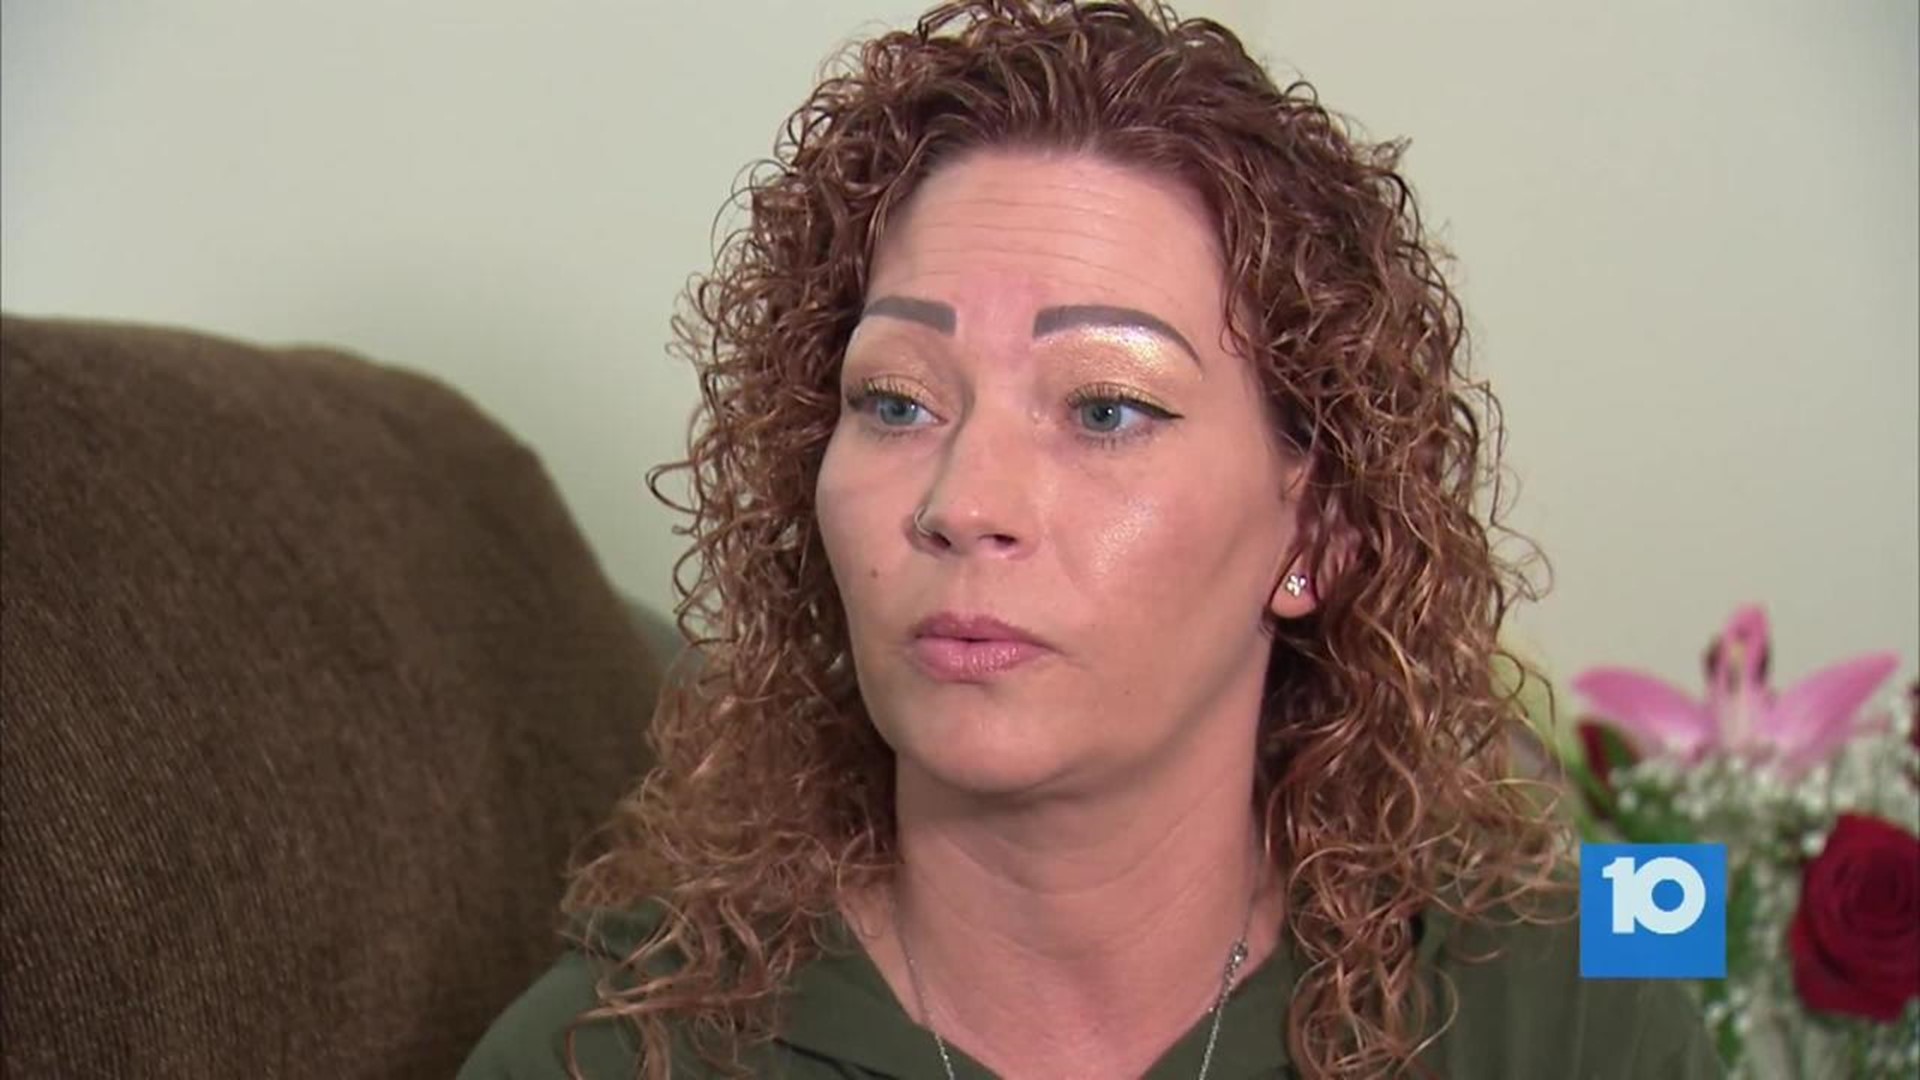 Woman who shot and killed husband speaks publicly for first time